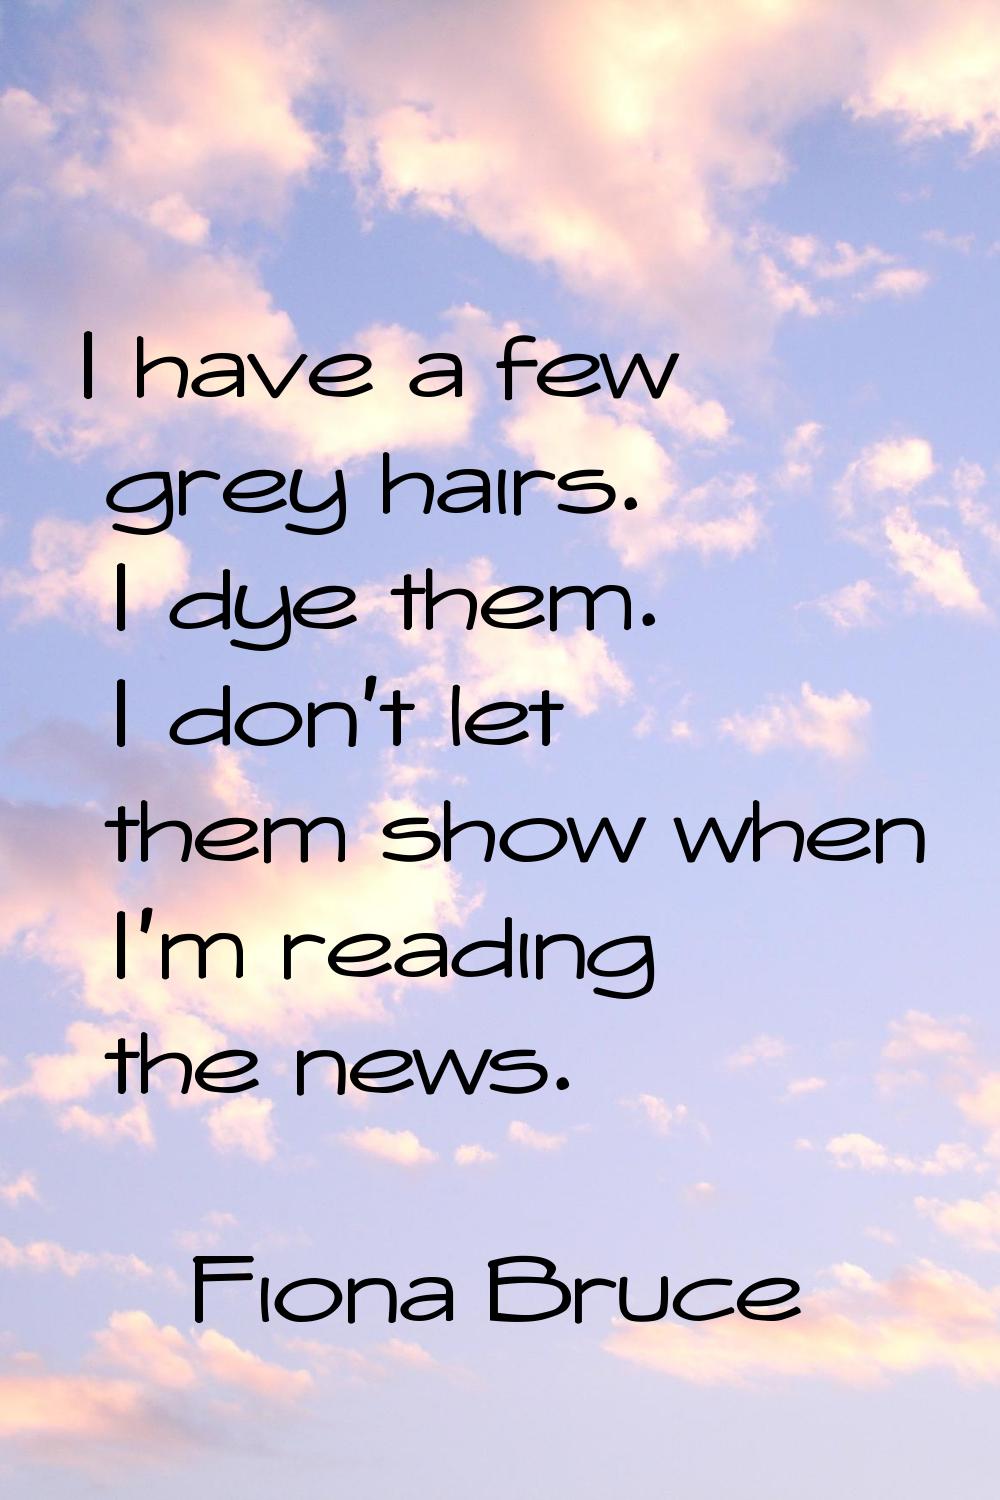 I have a few grey hairs. I dye them. I don't let them show when I'm reading the news.